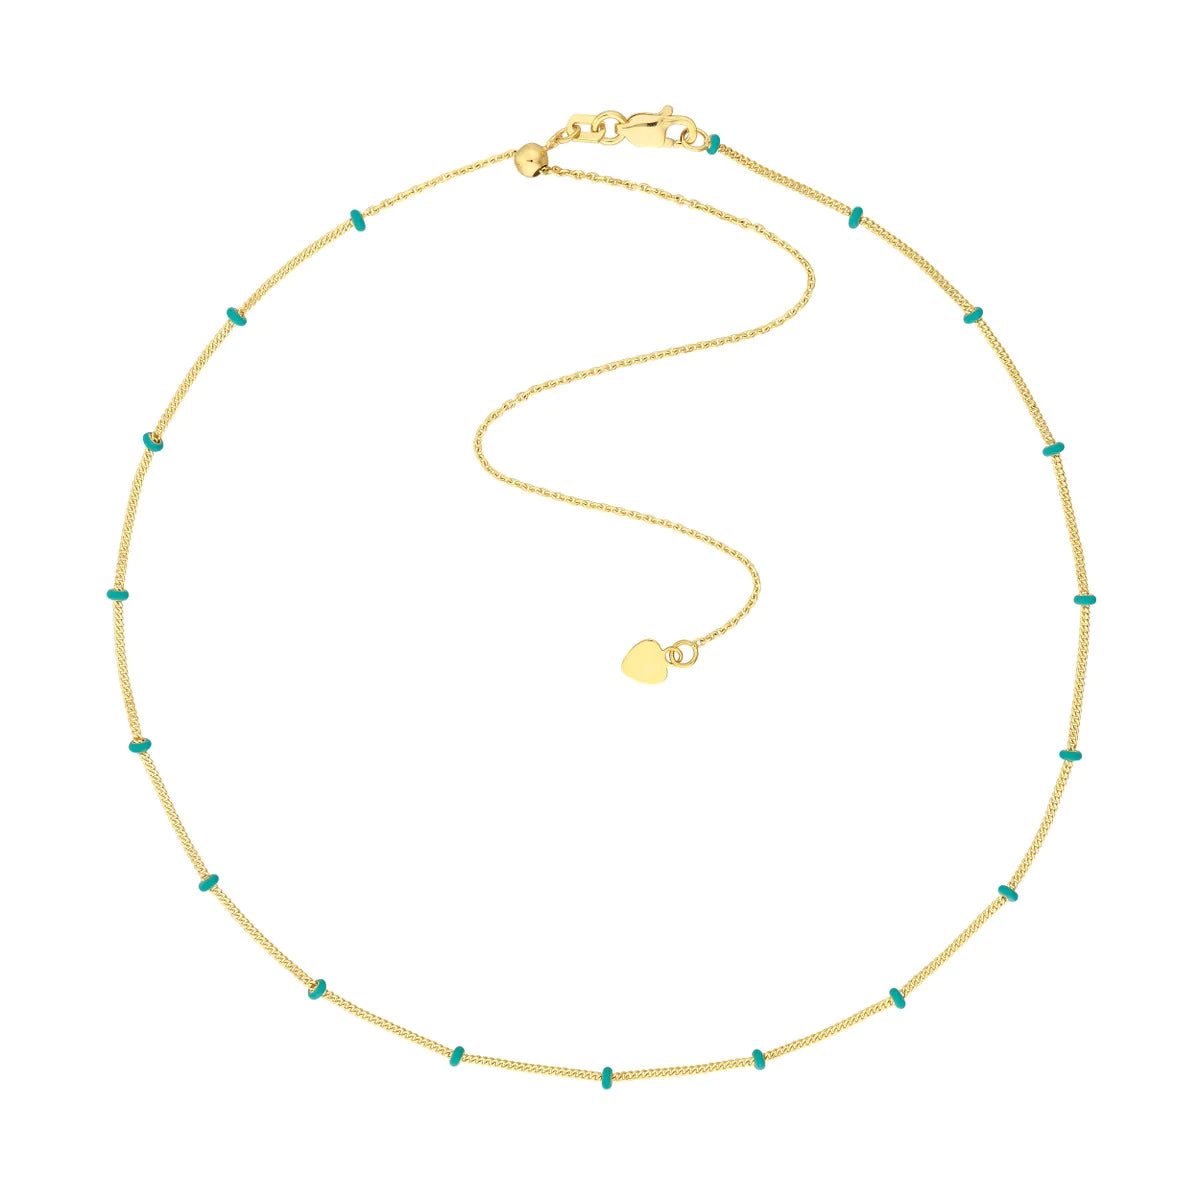 14K GOLD CUBAN CHAIN WITH ENAMEL BEADS